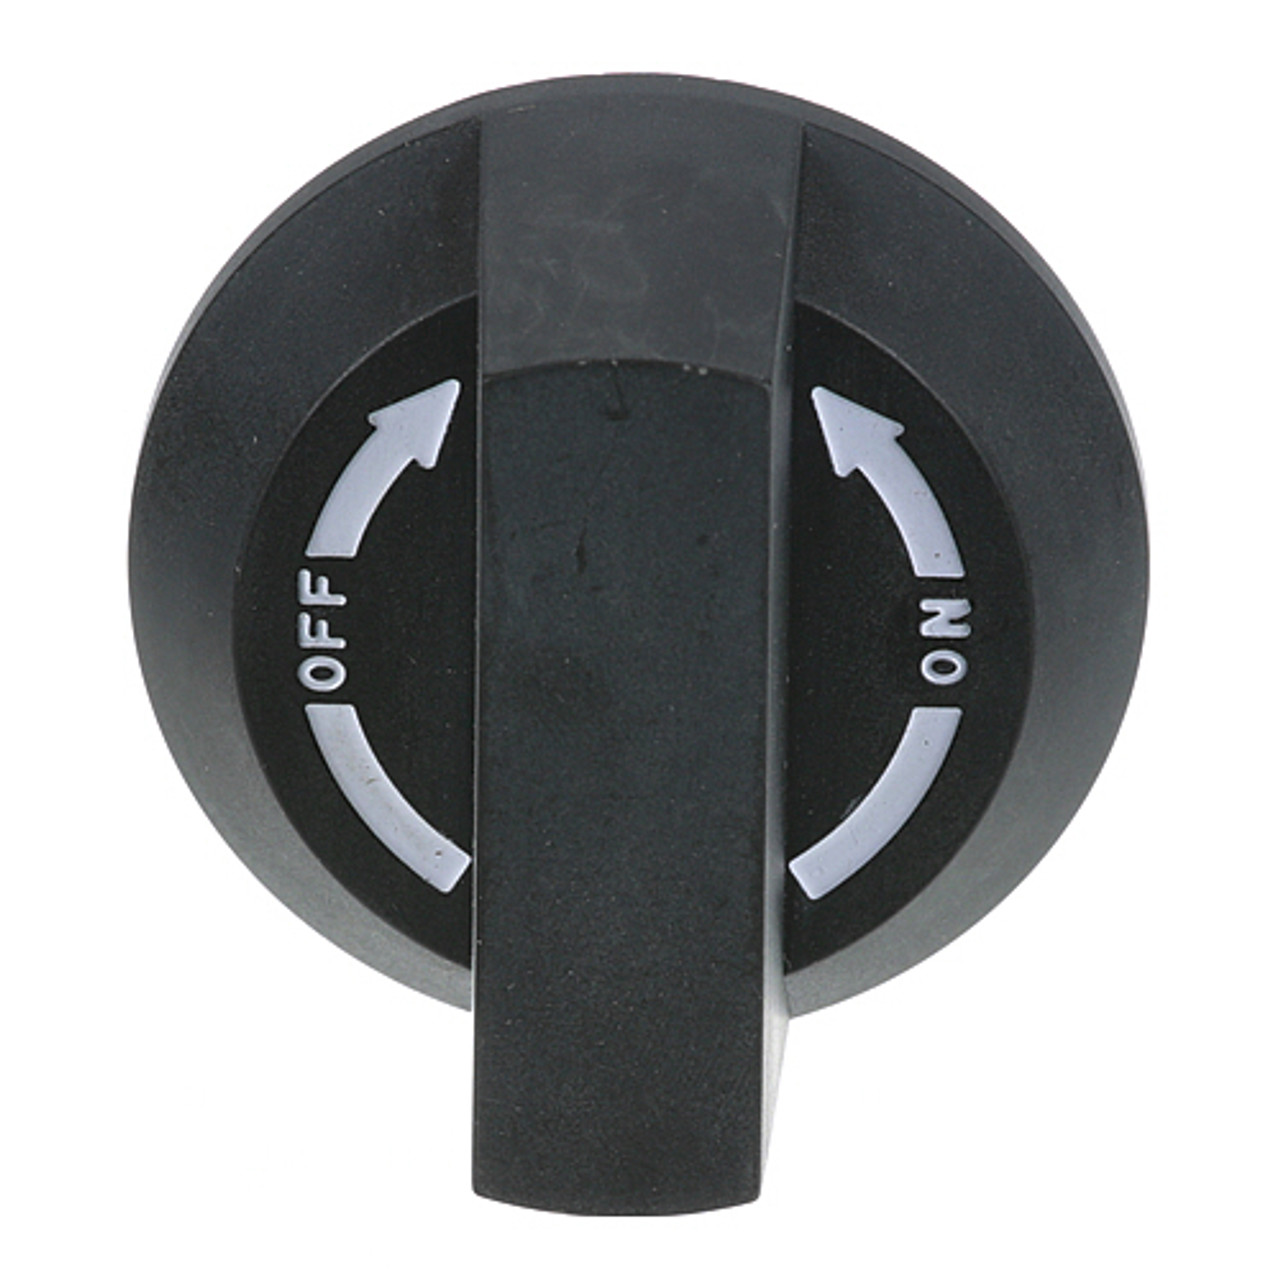 Knob 2-1/4 D, Off-On - Replacement Part For Rankin Delux DRB15